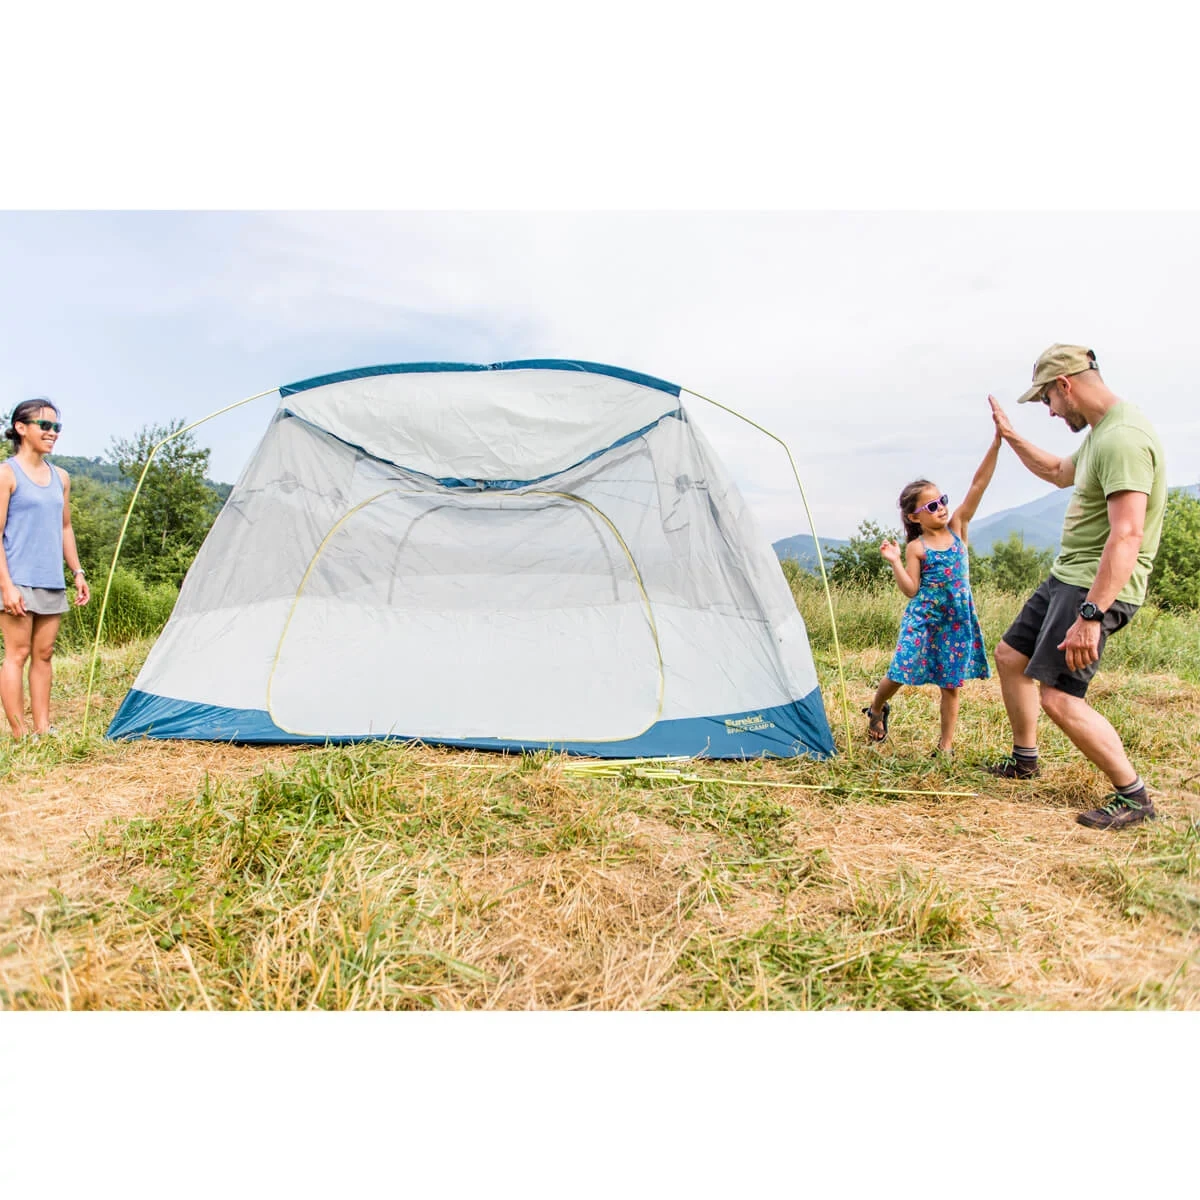 Family setting up Space Camp tent